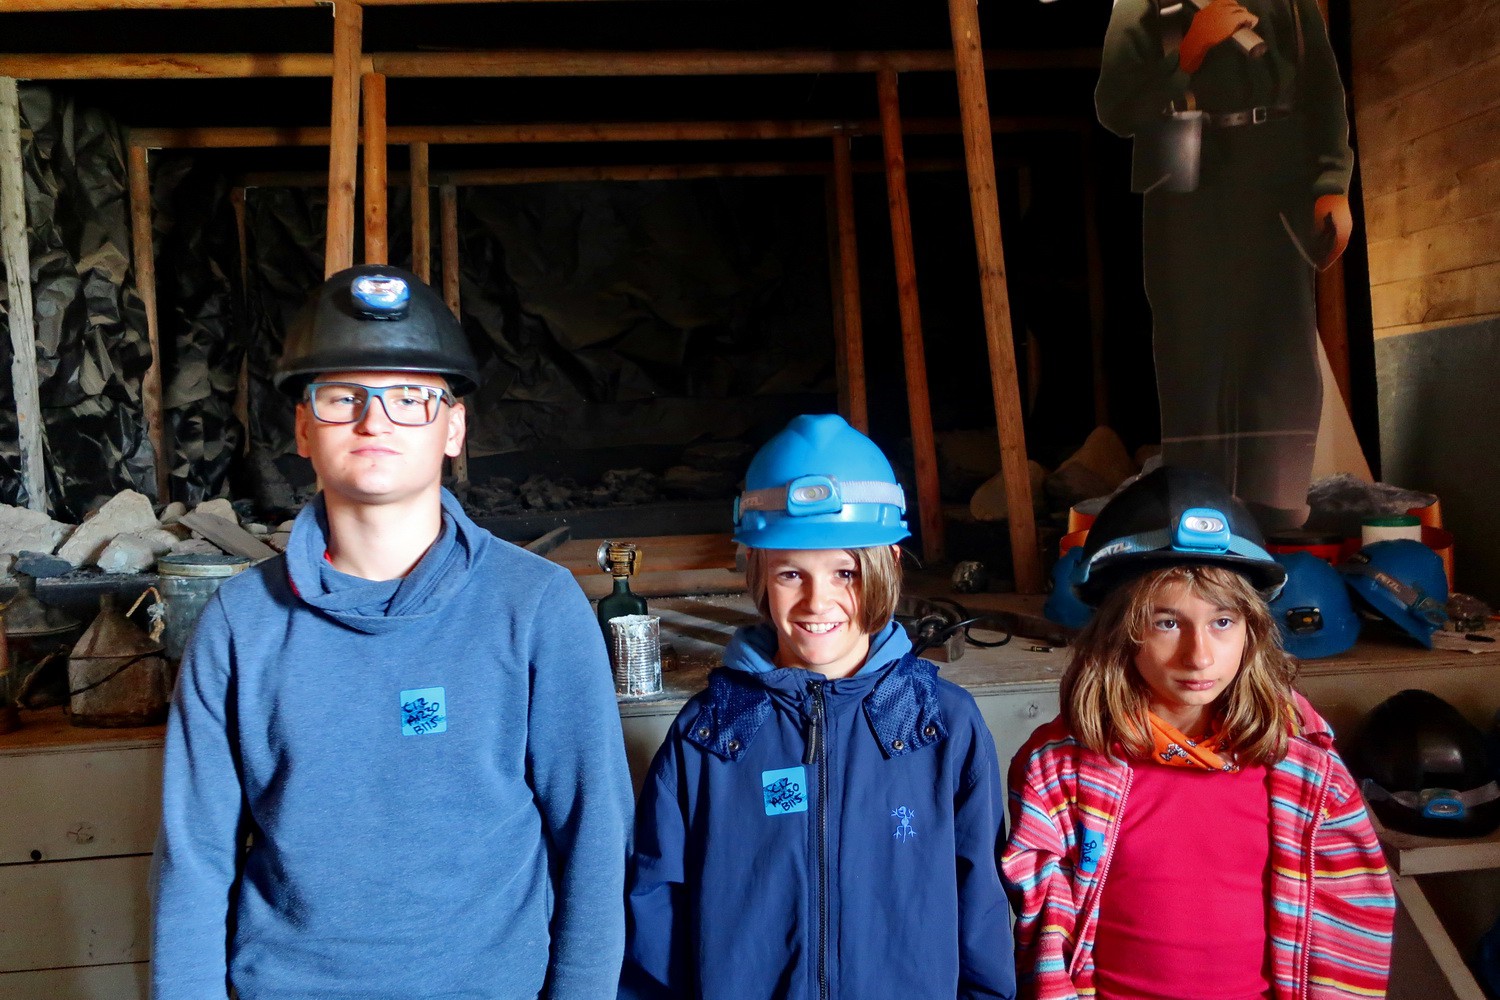 Kids ready for coal mining